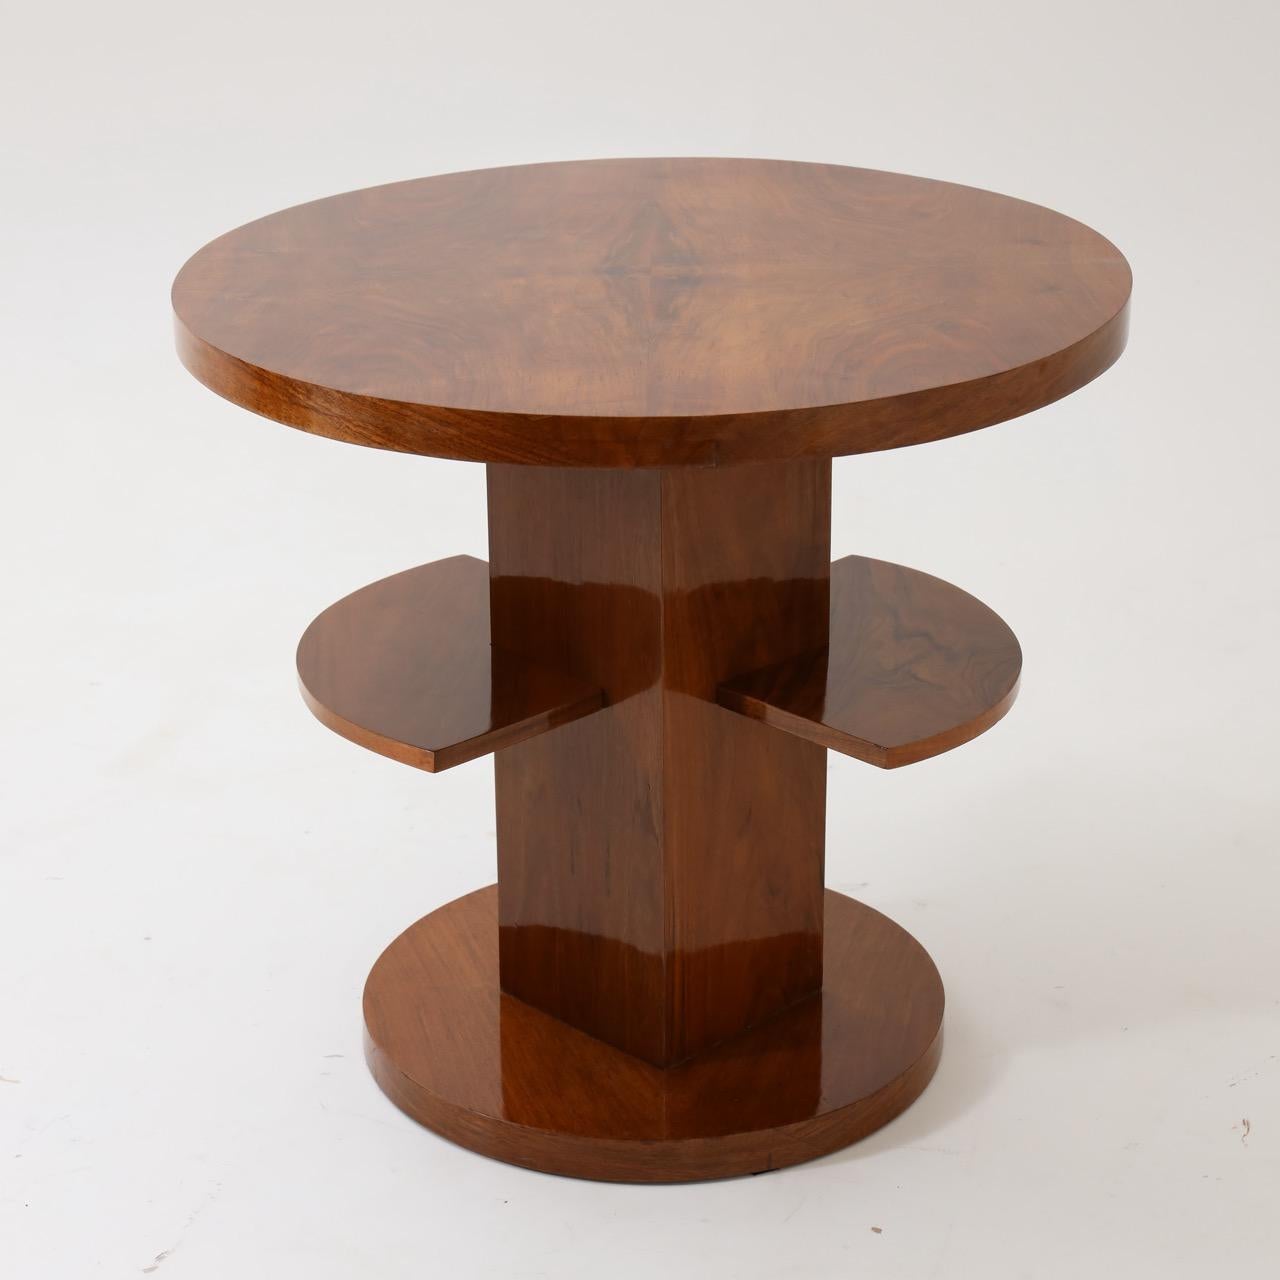 An Art Deco round side table. 
Walnut with central support featuring
two smaller shelves resting on a round base.